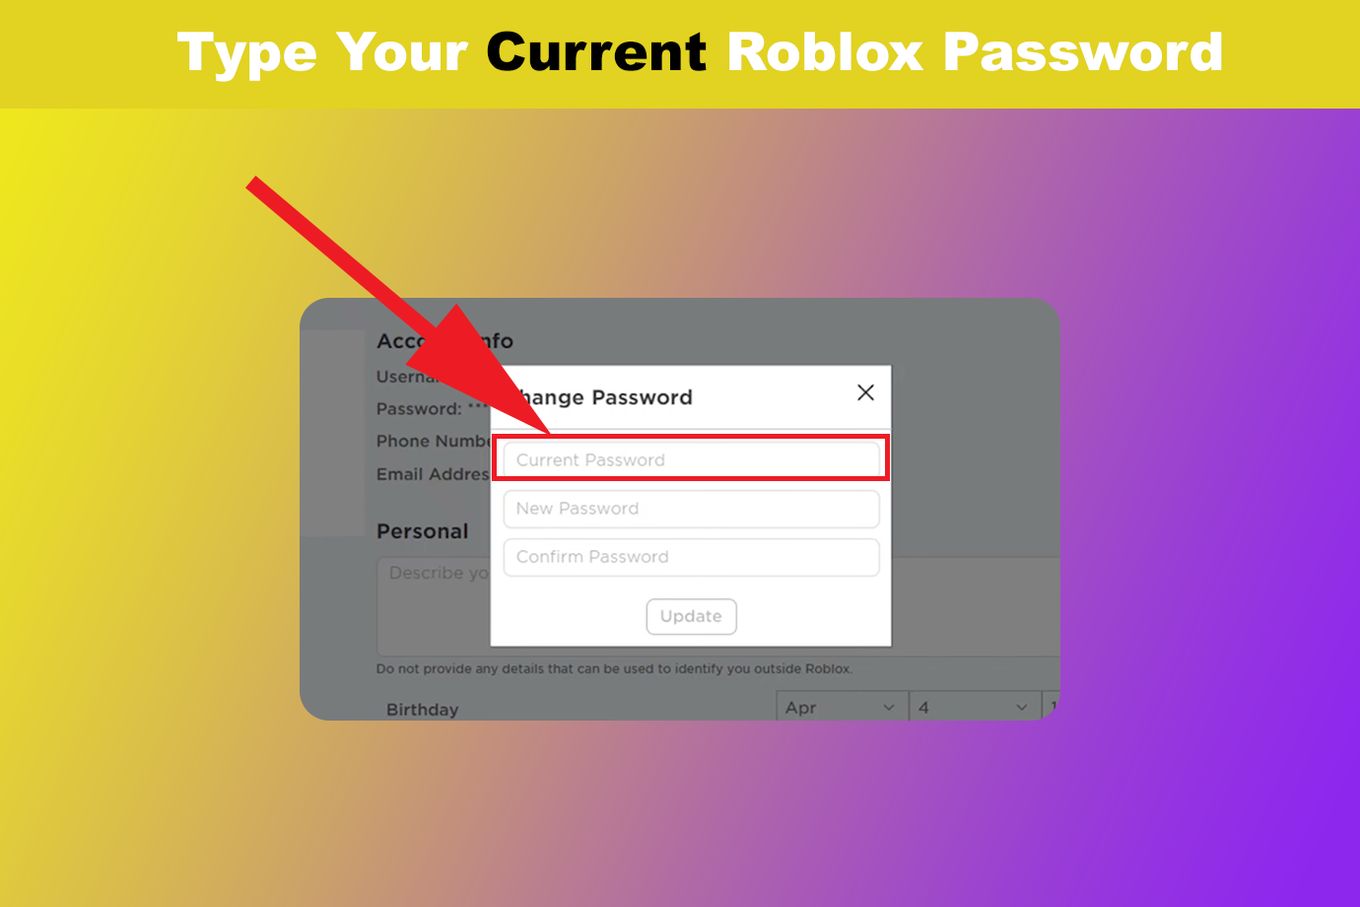 How to Change Your Username on Roblox